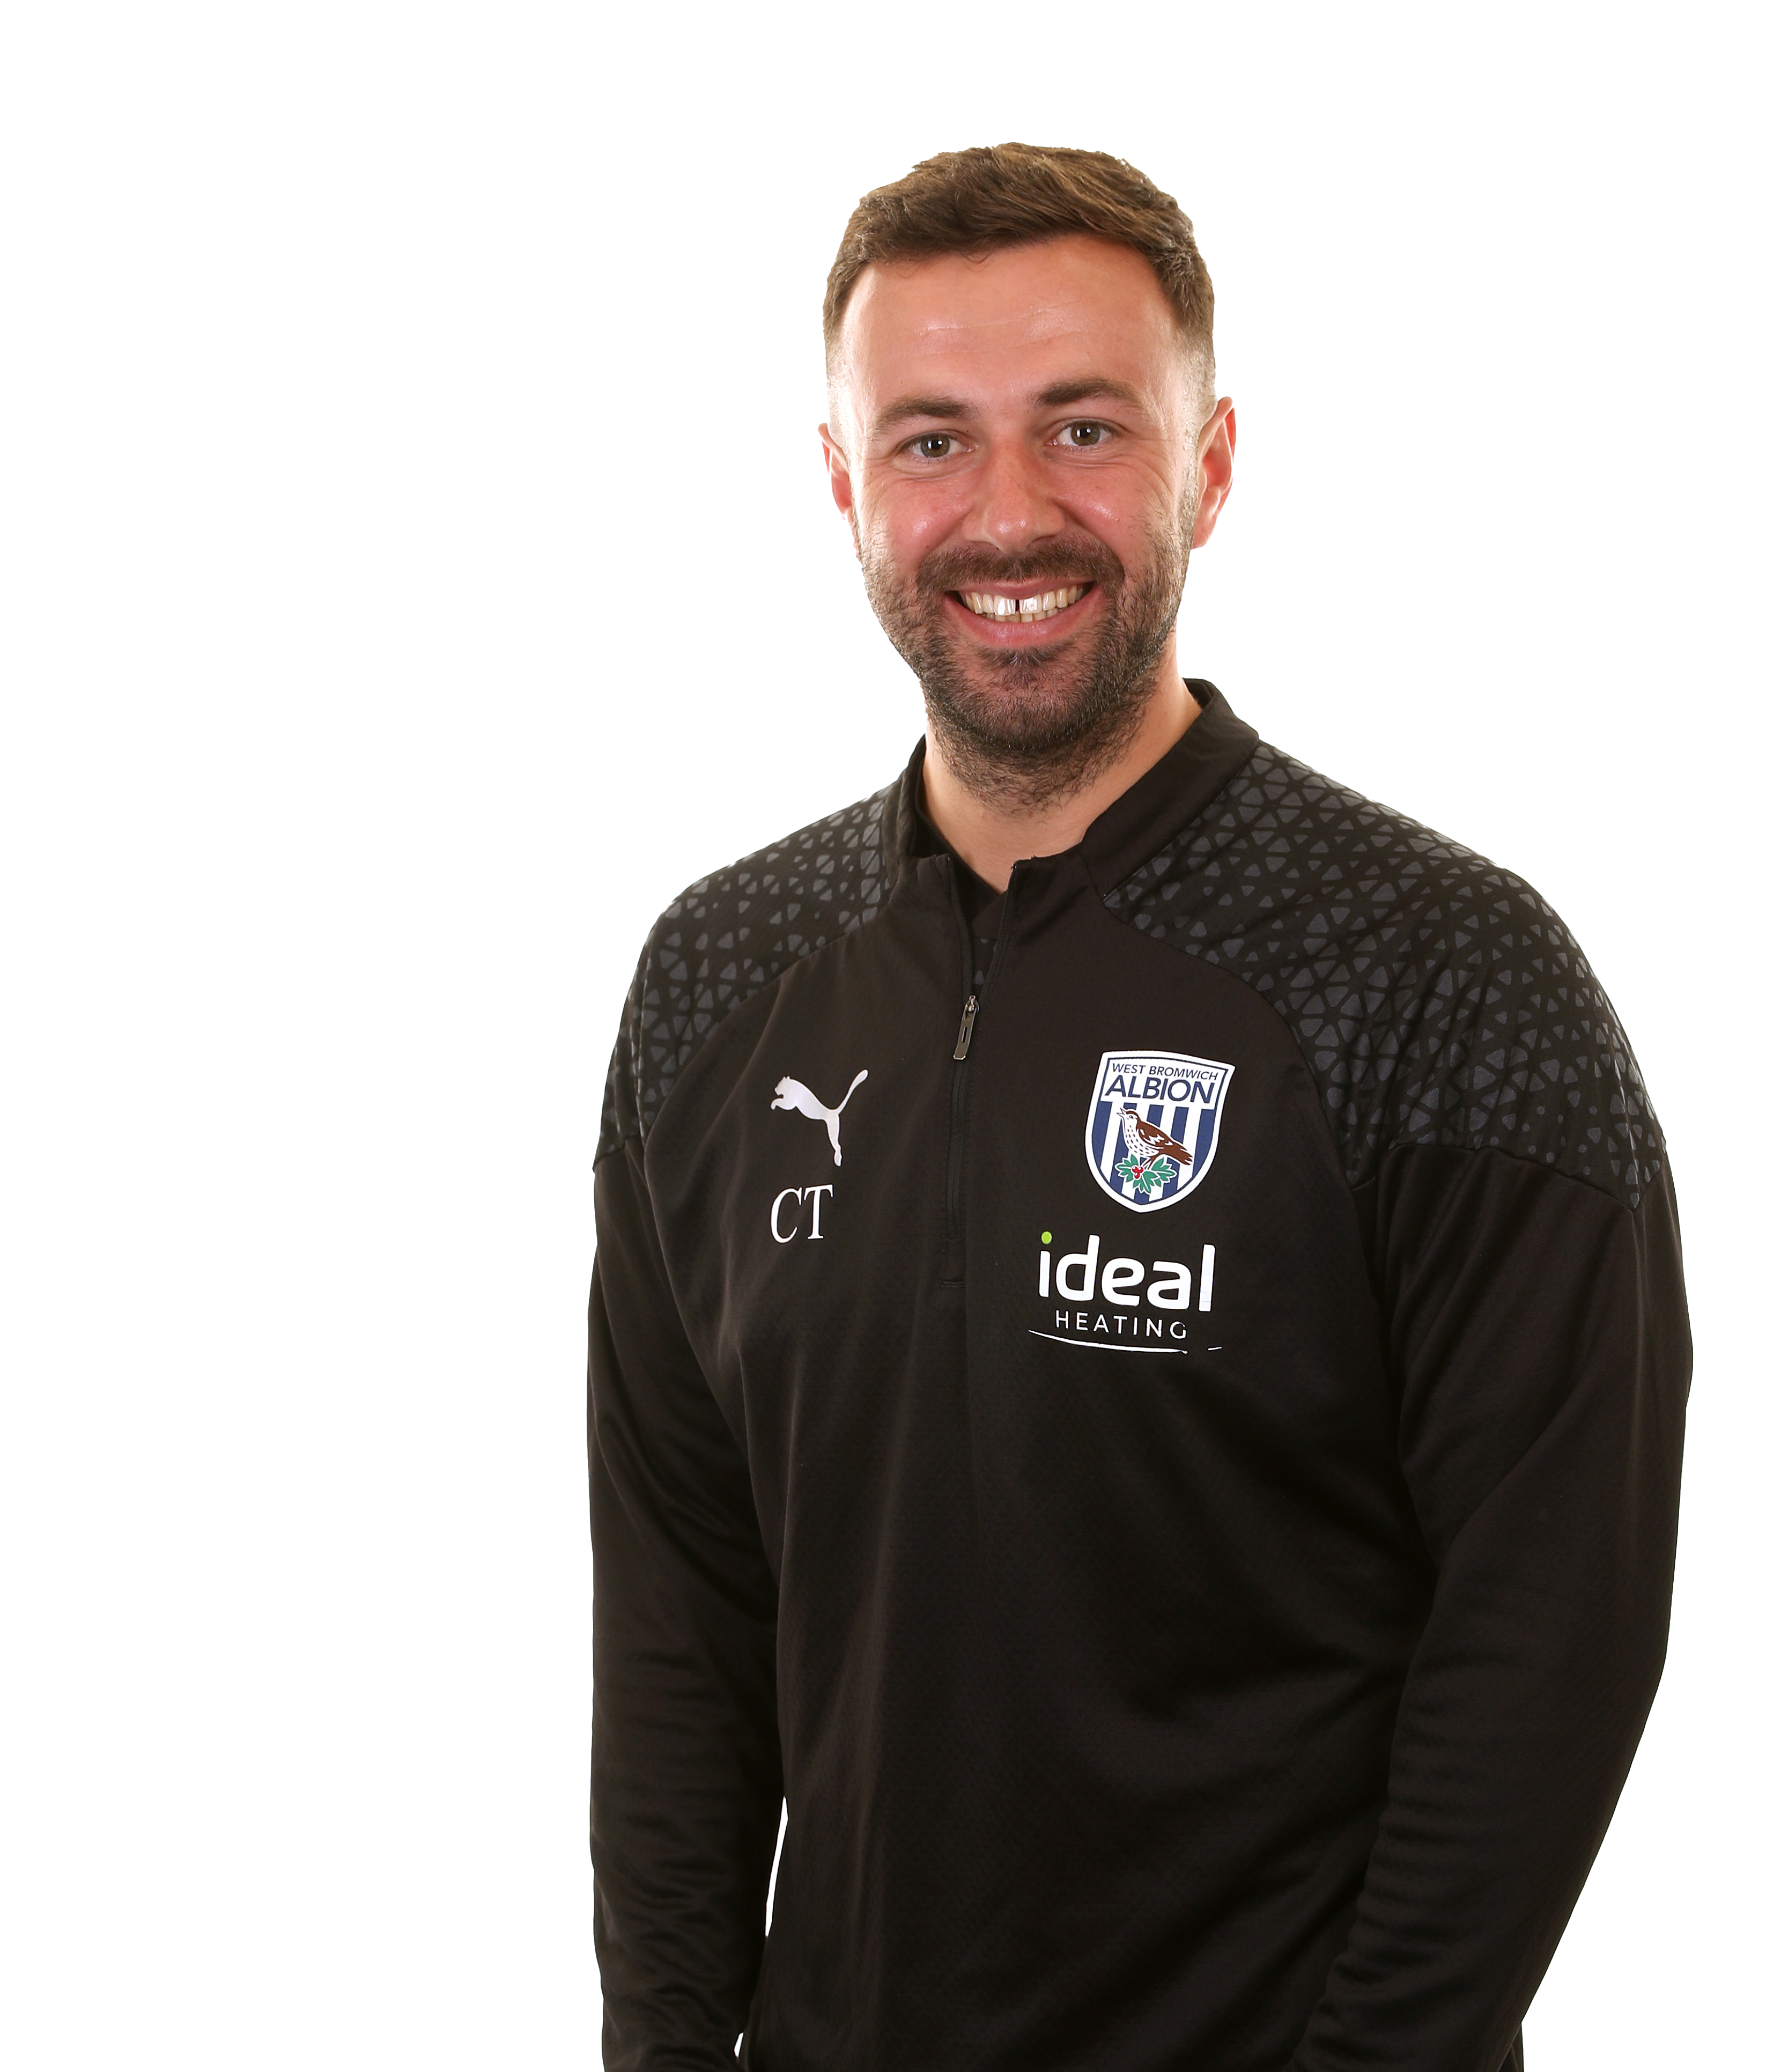 A photo headshot of Albion Under-18s assistant coach Chay Thompson ahead of the 2023/24 season